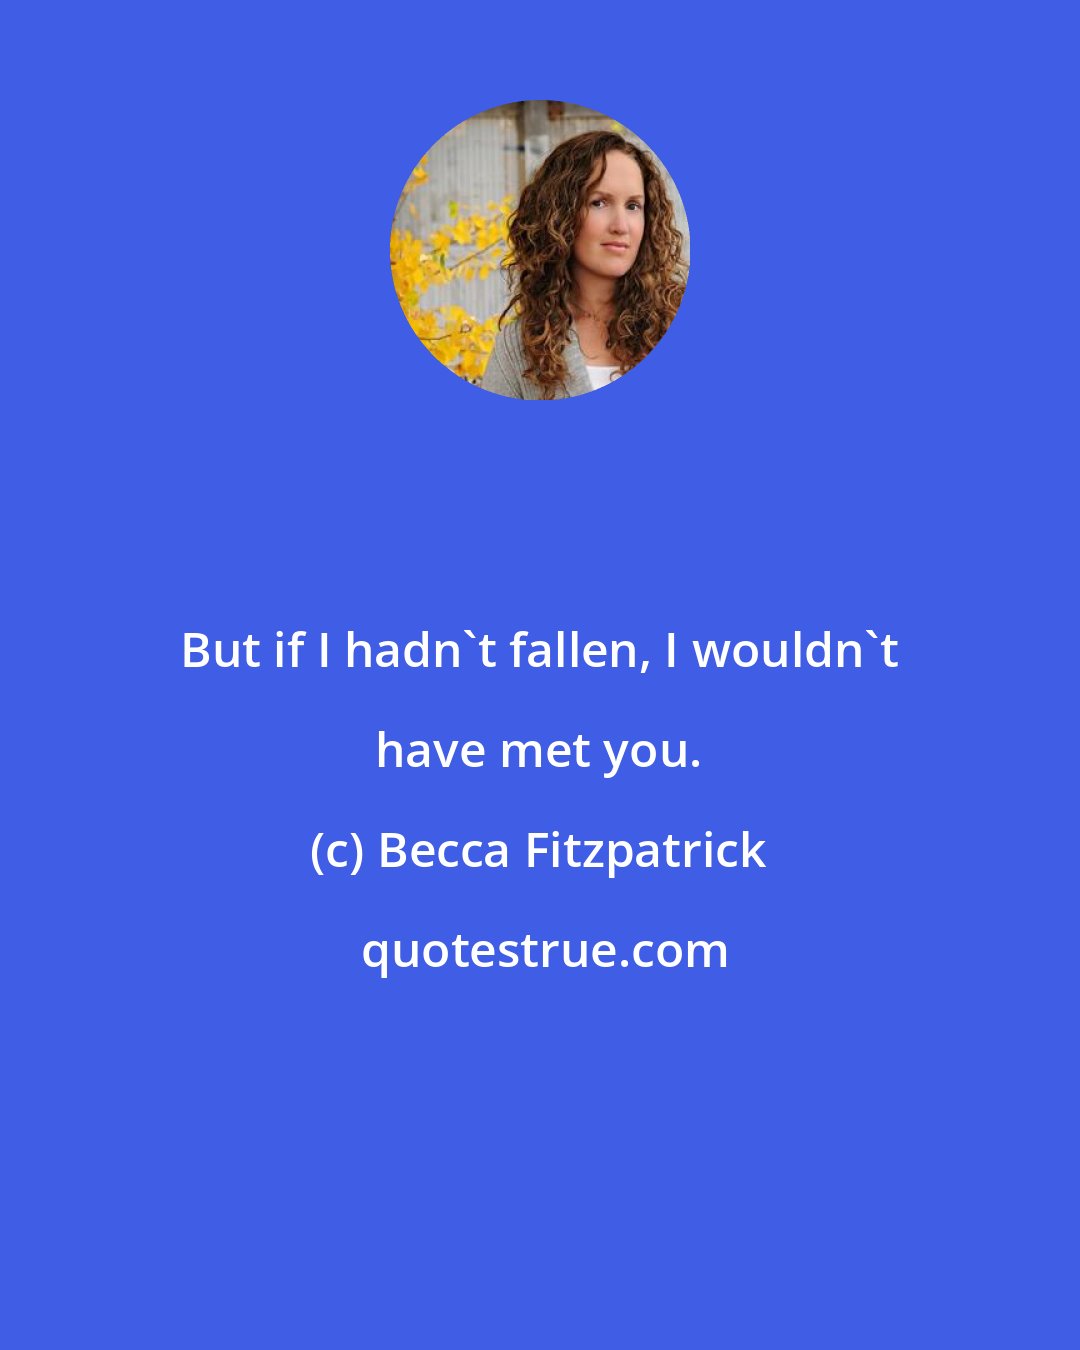 Becca Fitzpatrick: But if I hadn't fallen, I wouldn't have met you.